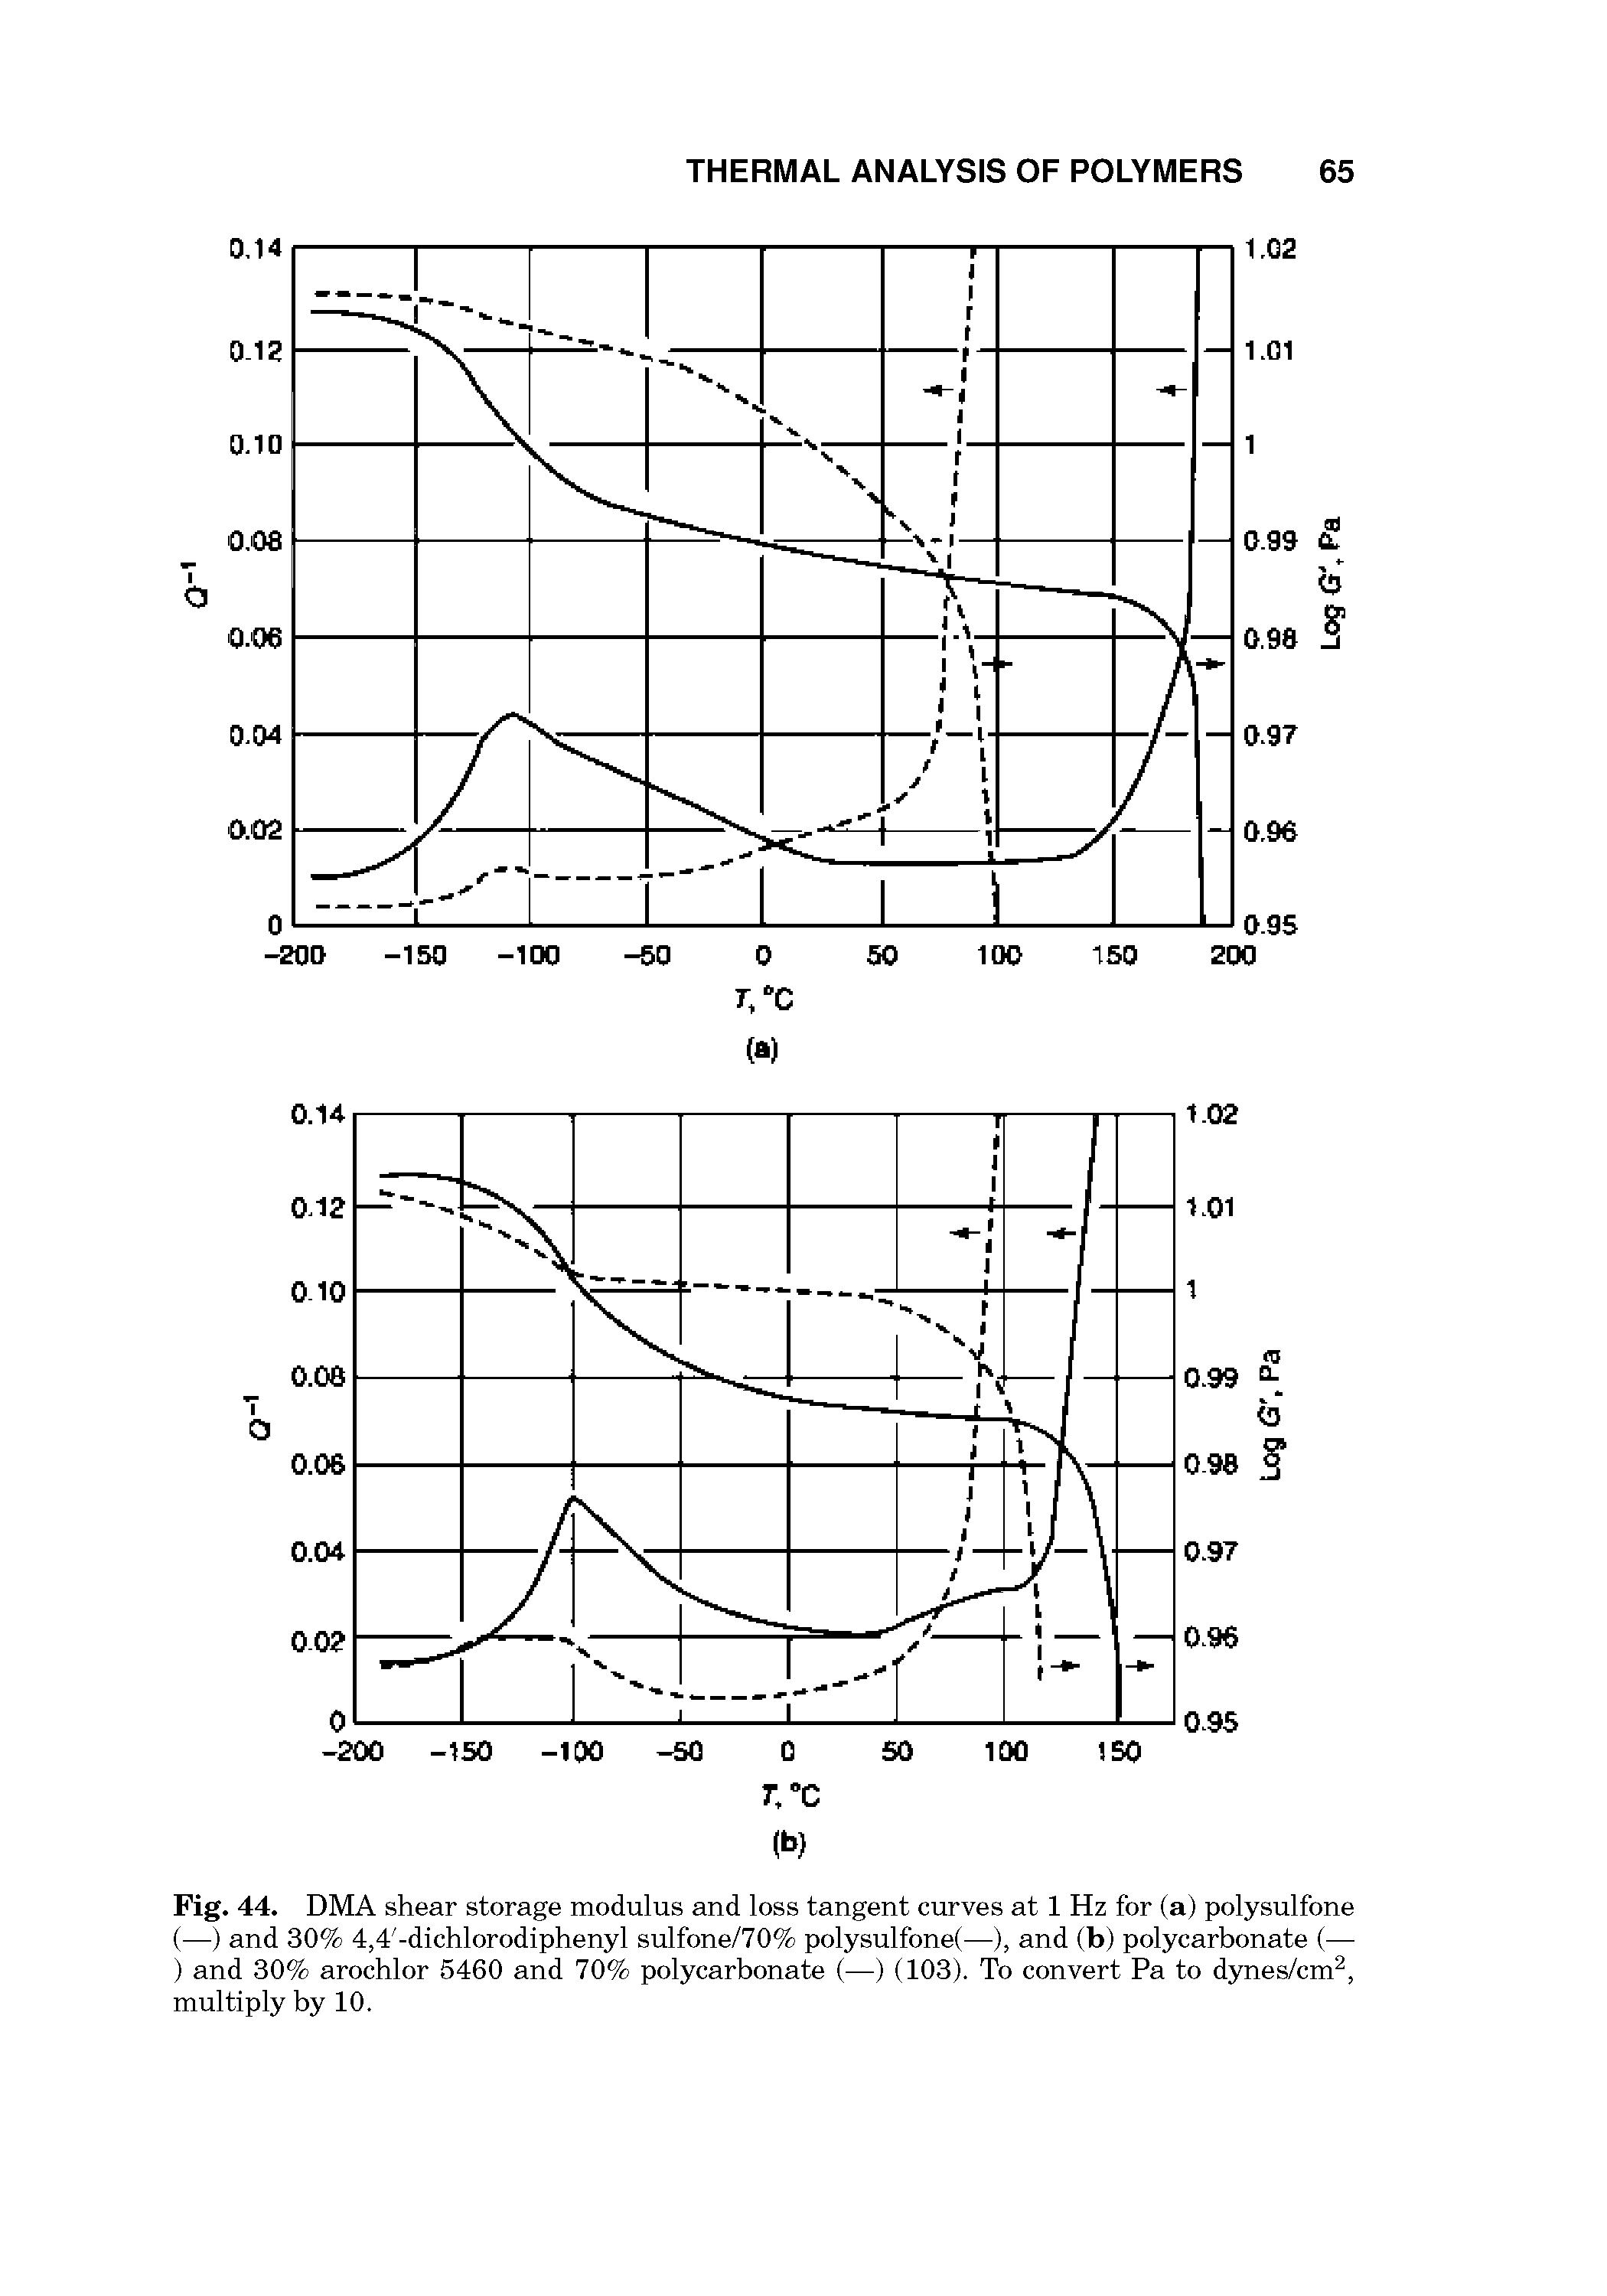 Fig. 44. DMA shear storage modulus and loss tangent curves at 1 Hz for (a) polysulfone (—) and 30% 4,4 -dichlorodiphenyl sulfone/70% polysulfone(—), and (b) polycarbonate (— ) and 30% arochlor 5460 and 70% polycarbonate (—) (103). To convert Pa to dynes/cm, multiply by 10.